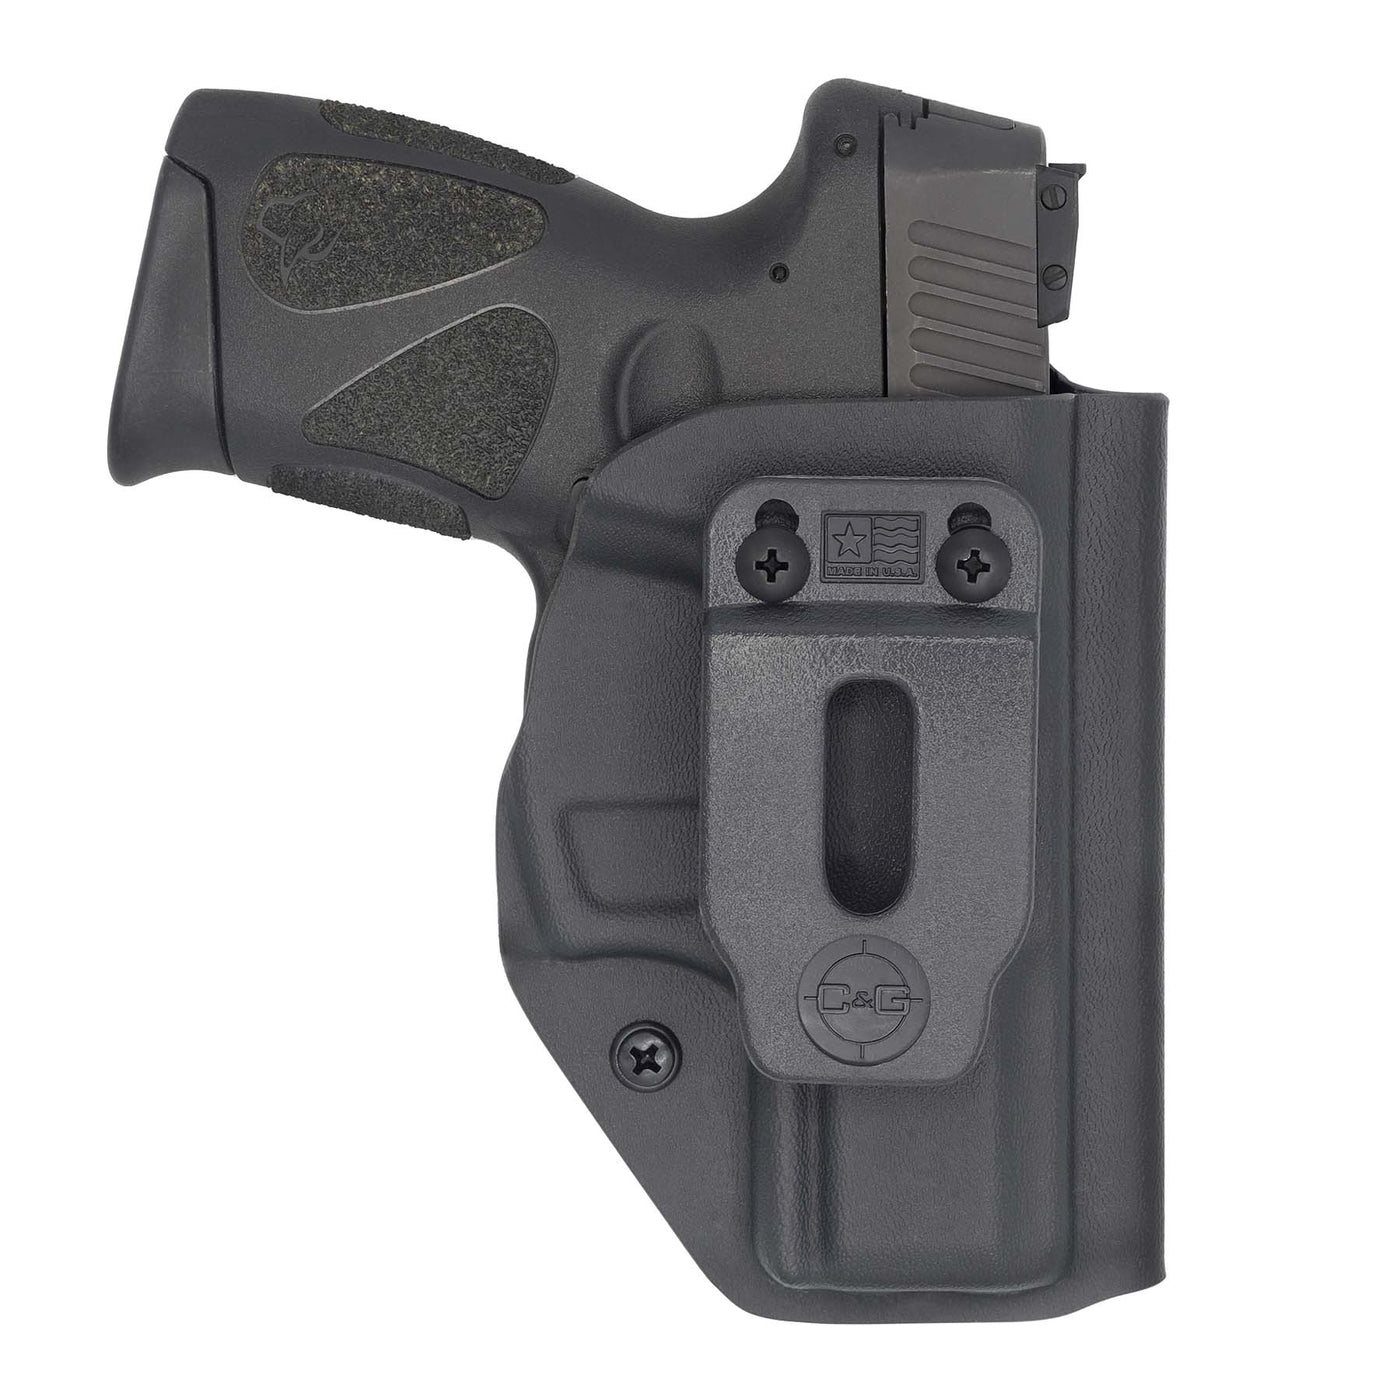 C&G Holsters IWB inside the waistband Holster for the Taurus G2C in the holstered position.